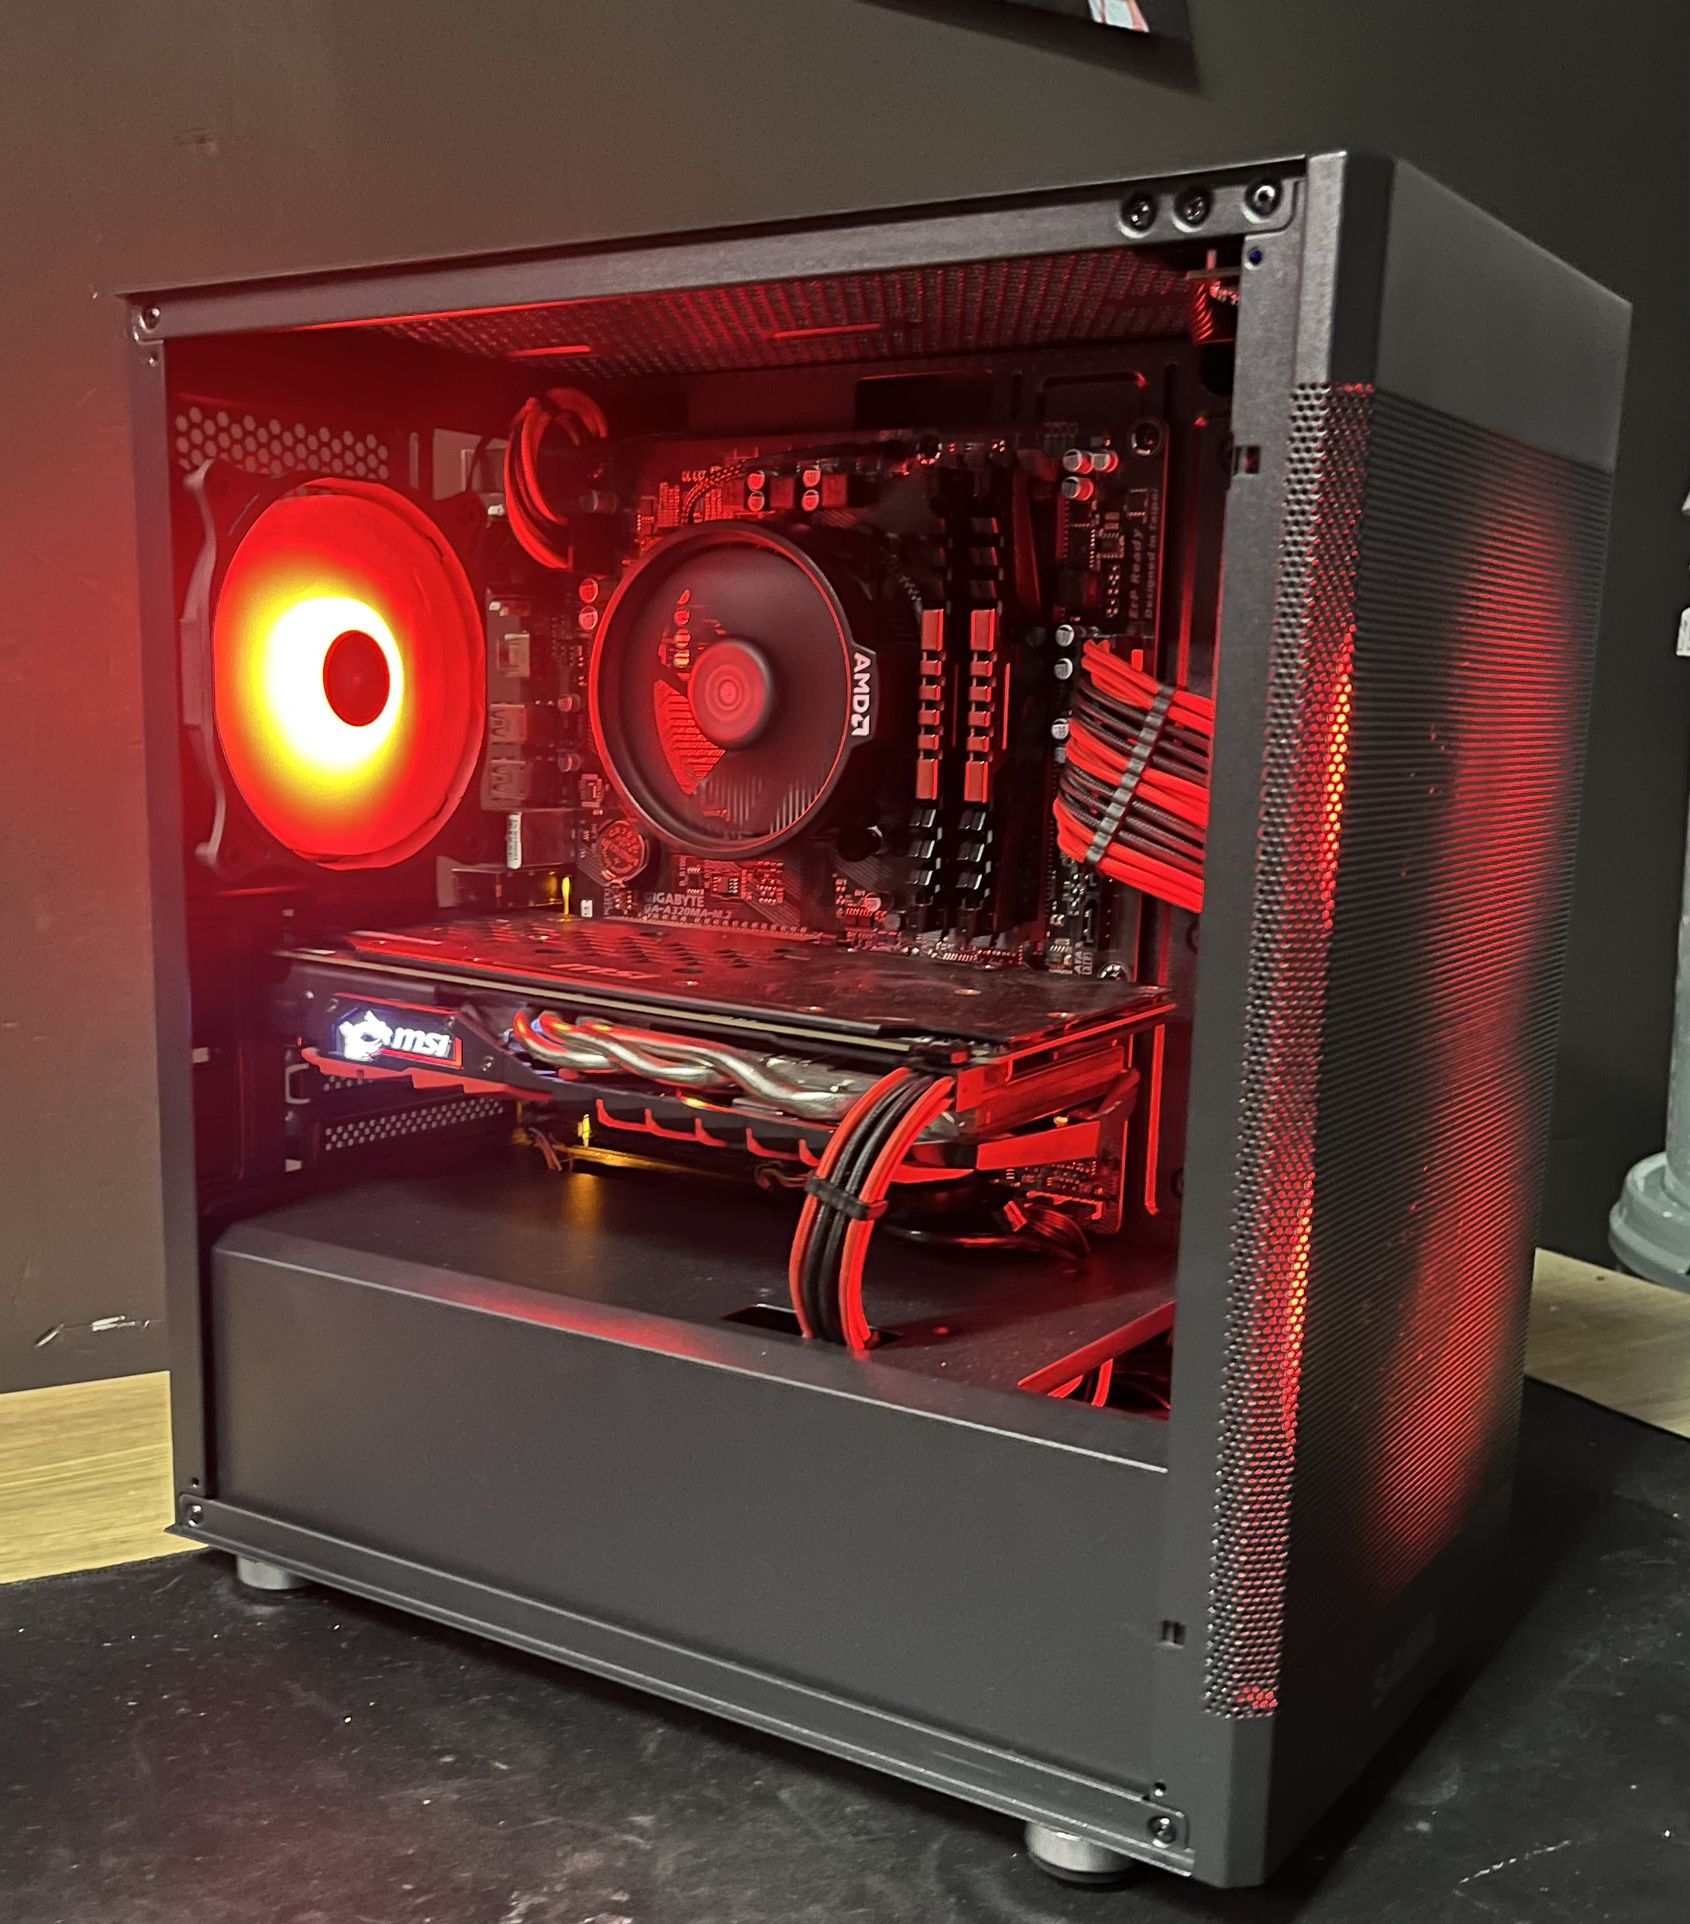 Budget Red And Black Gaming Computer | Ryzen 5 1500X and RX 480 8gb